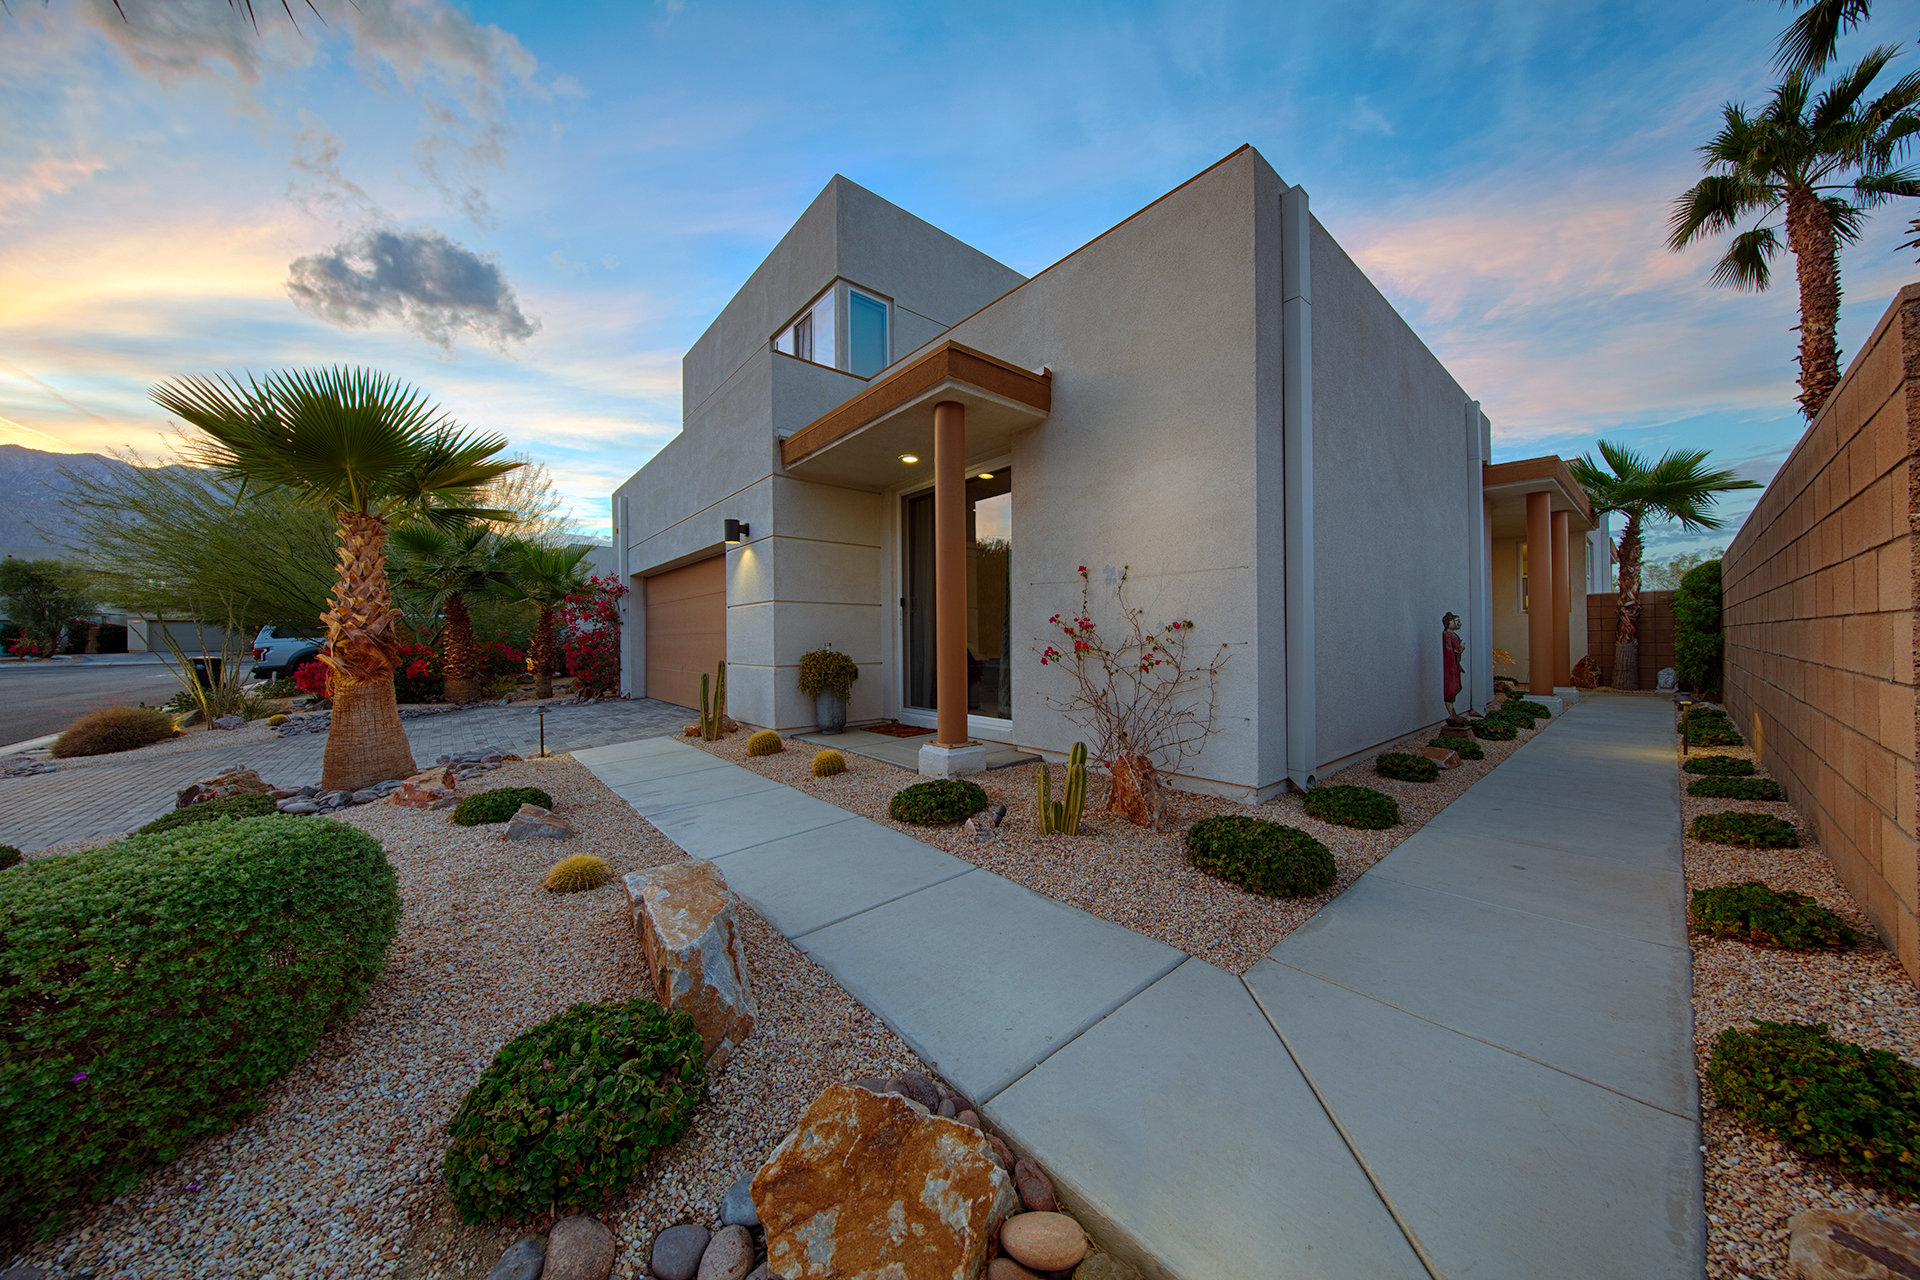 A home in Escena built by Lennar Homes.